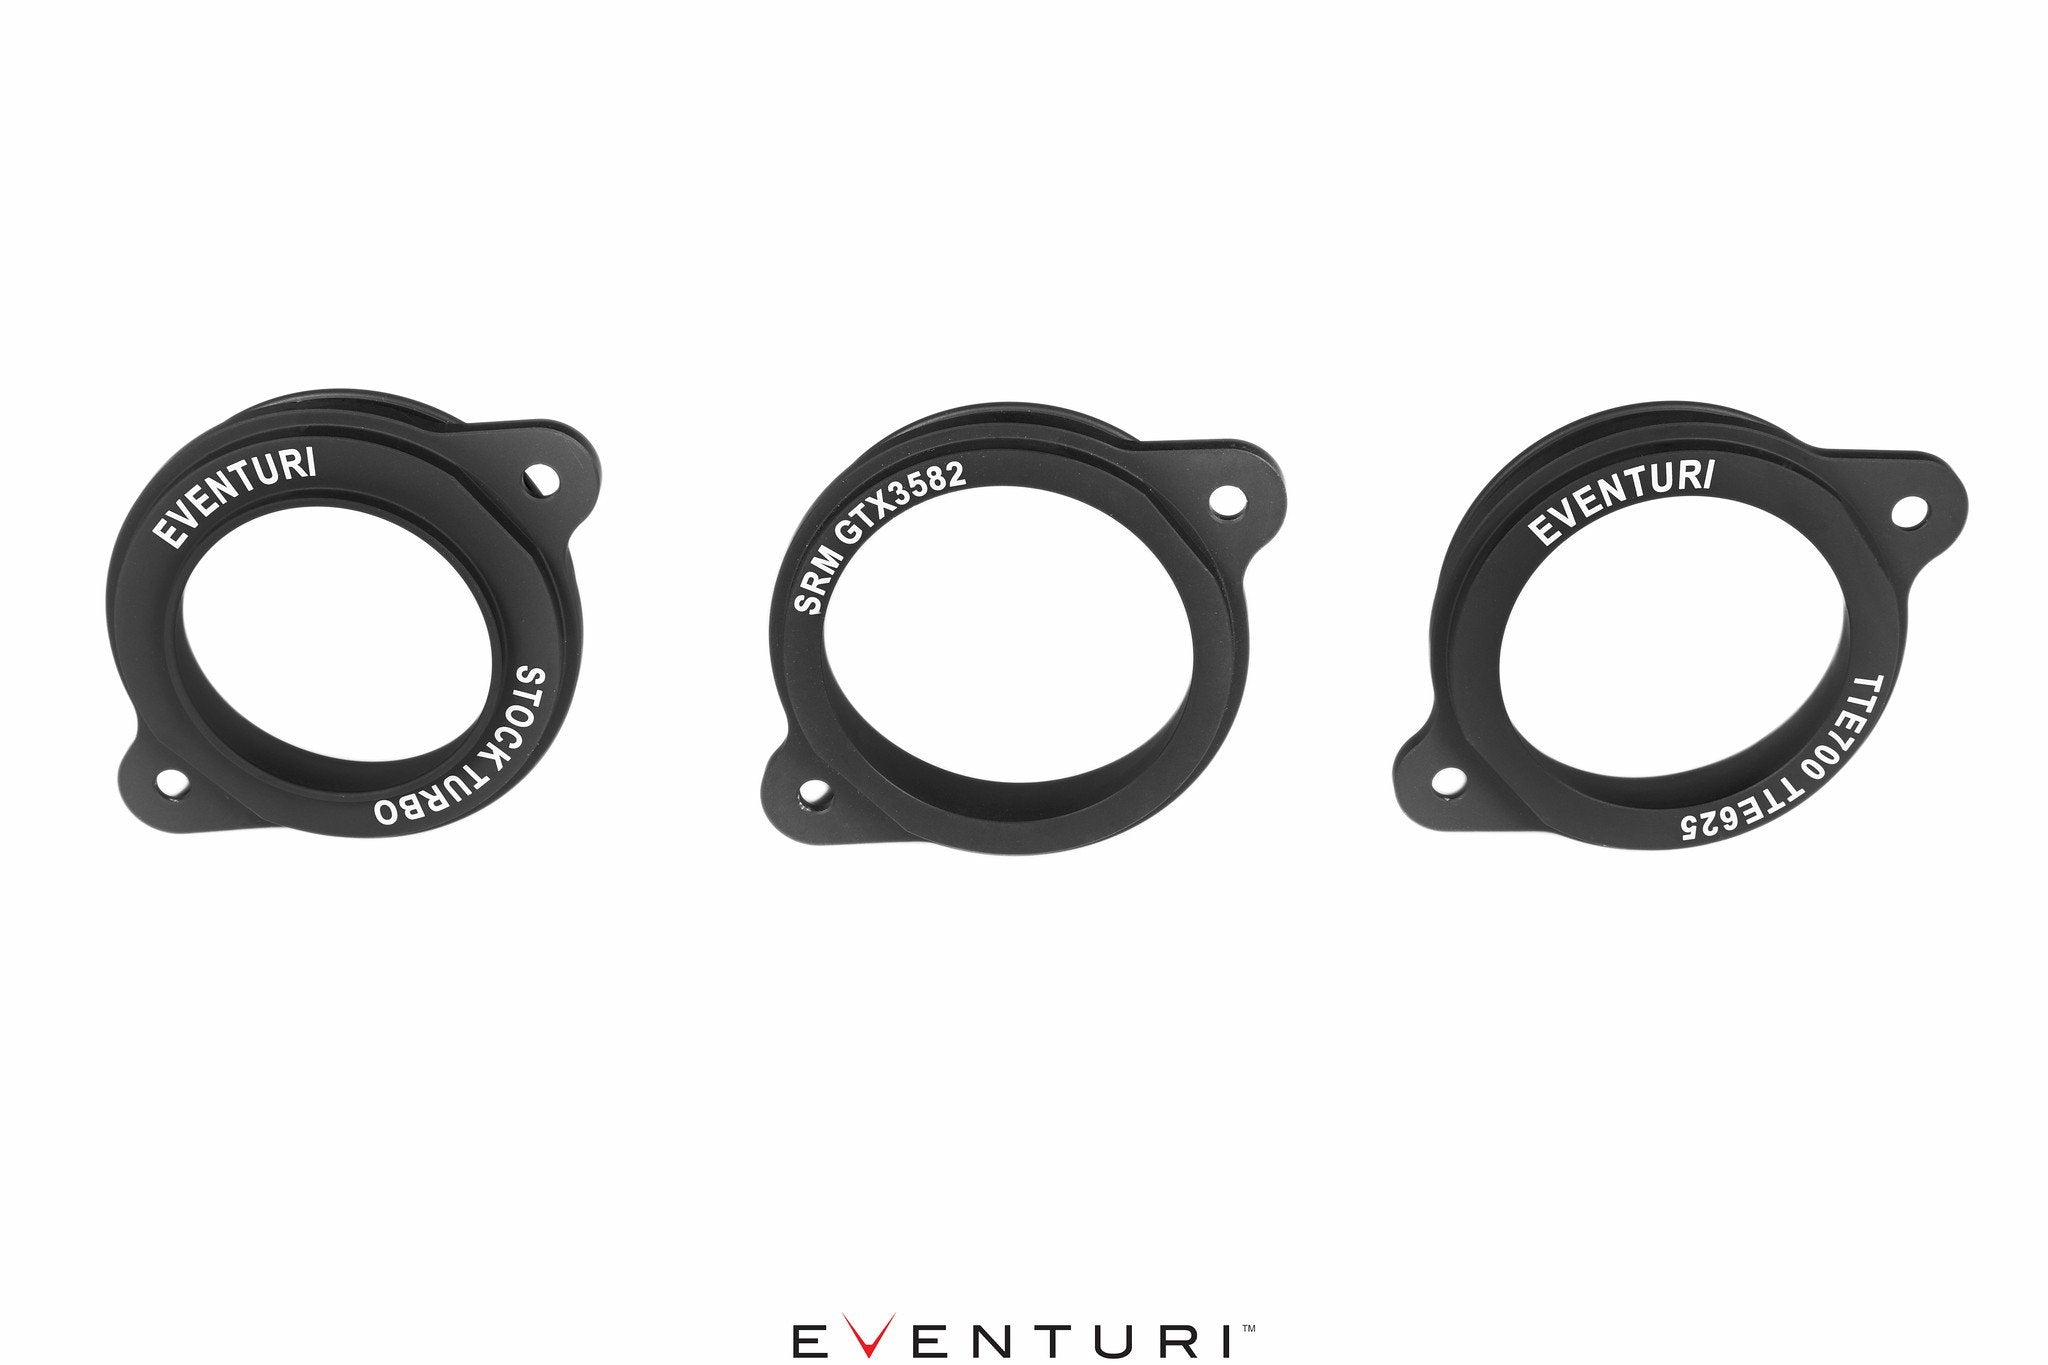 Eventuri Audi RS3 Gen 2 8V.5 & TTRS 8S Carbon Turbo Inlet for Carbon Intake Without FLANGE - MODE Auto Concepts